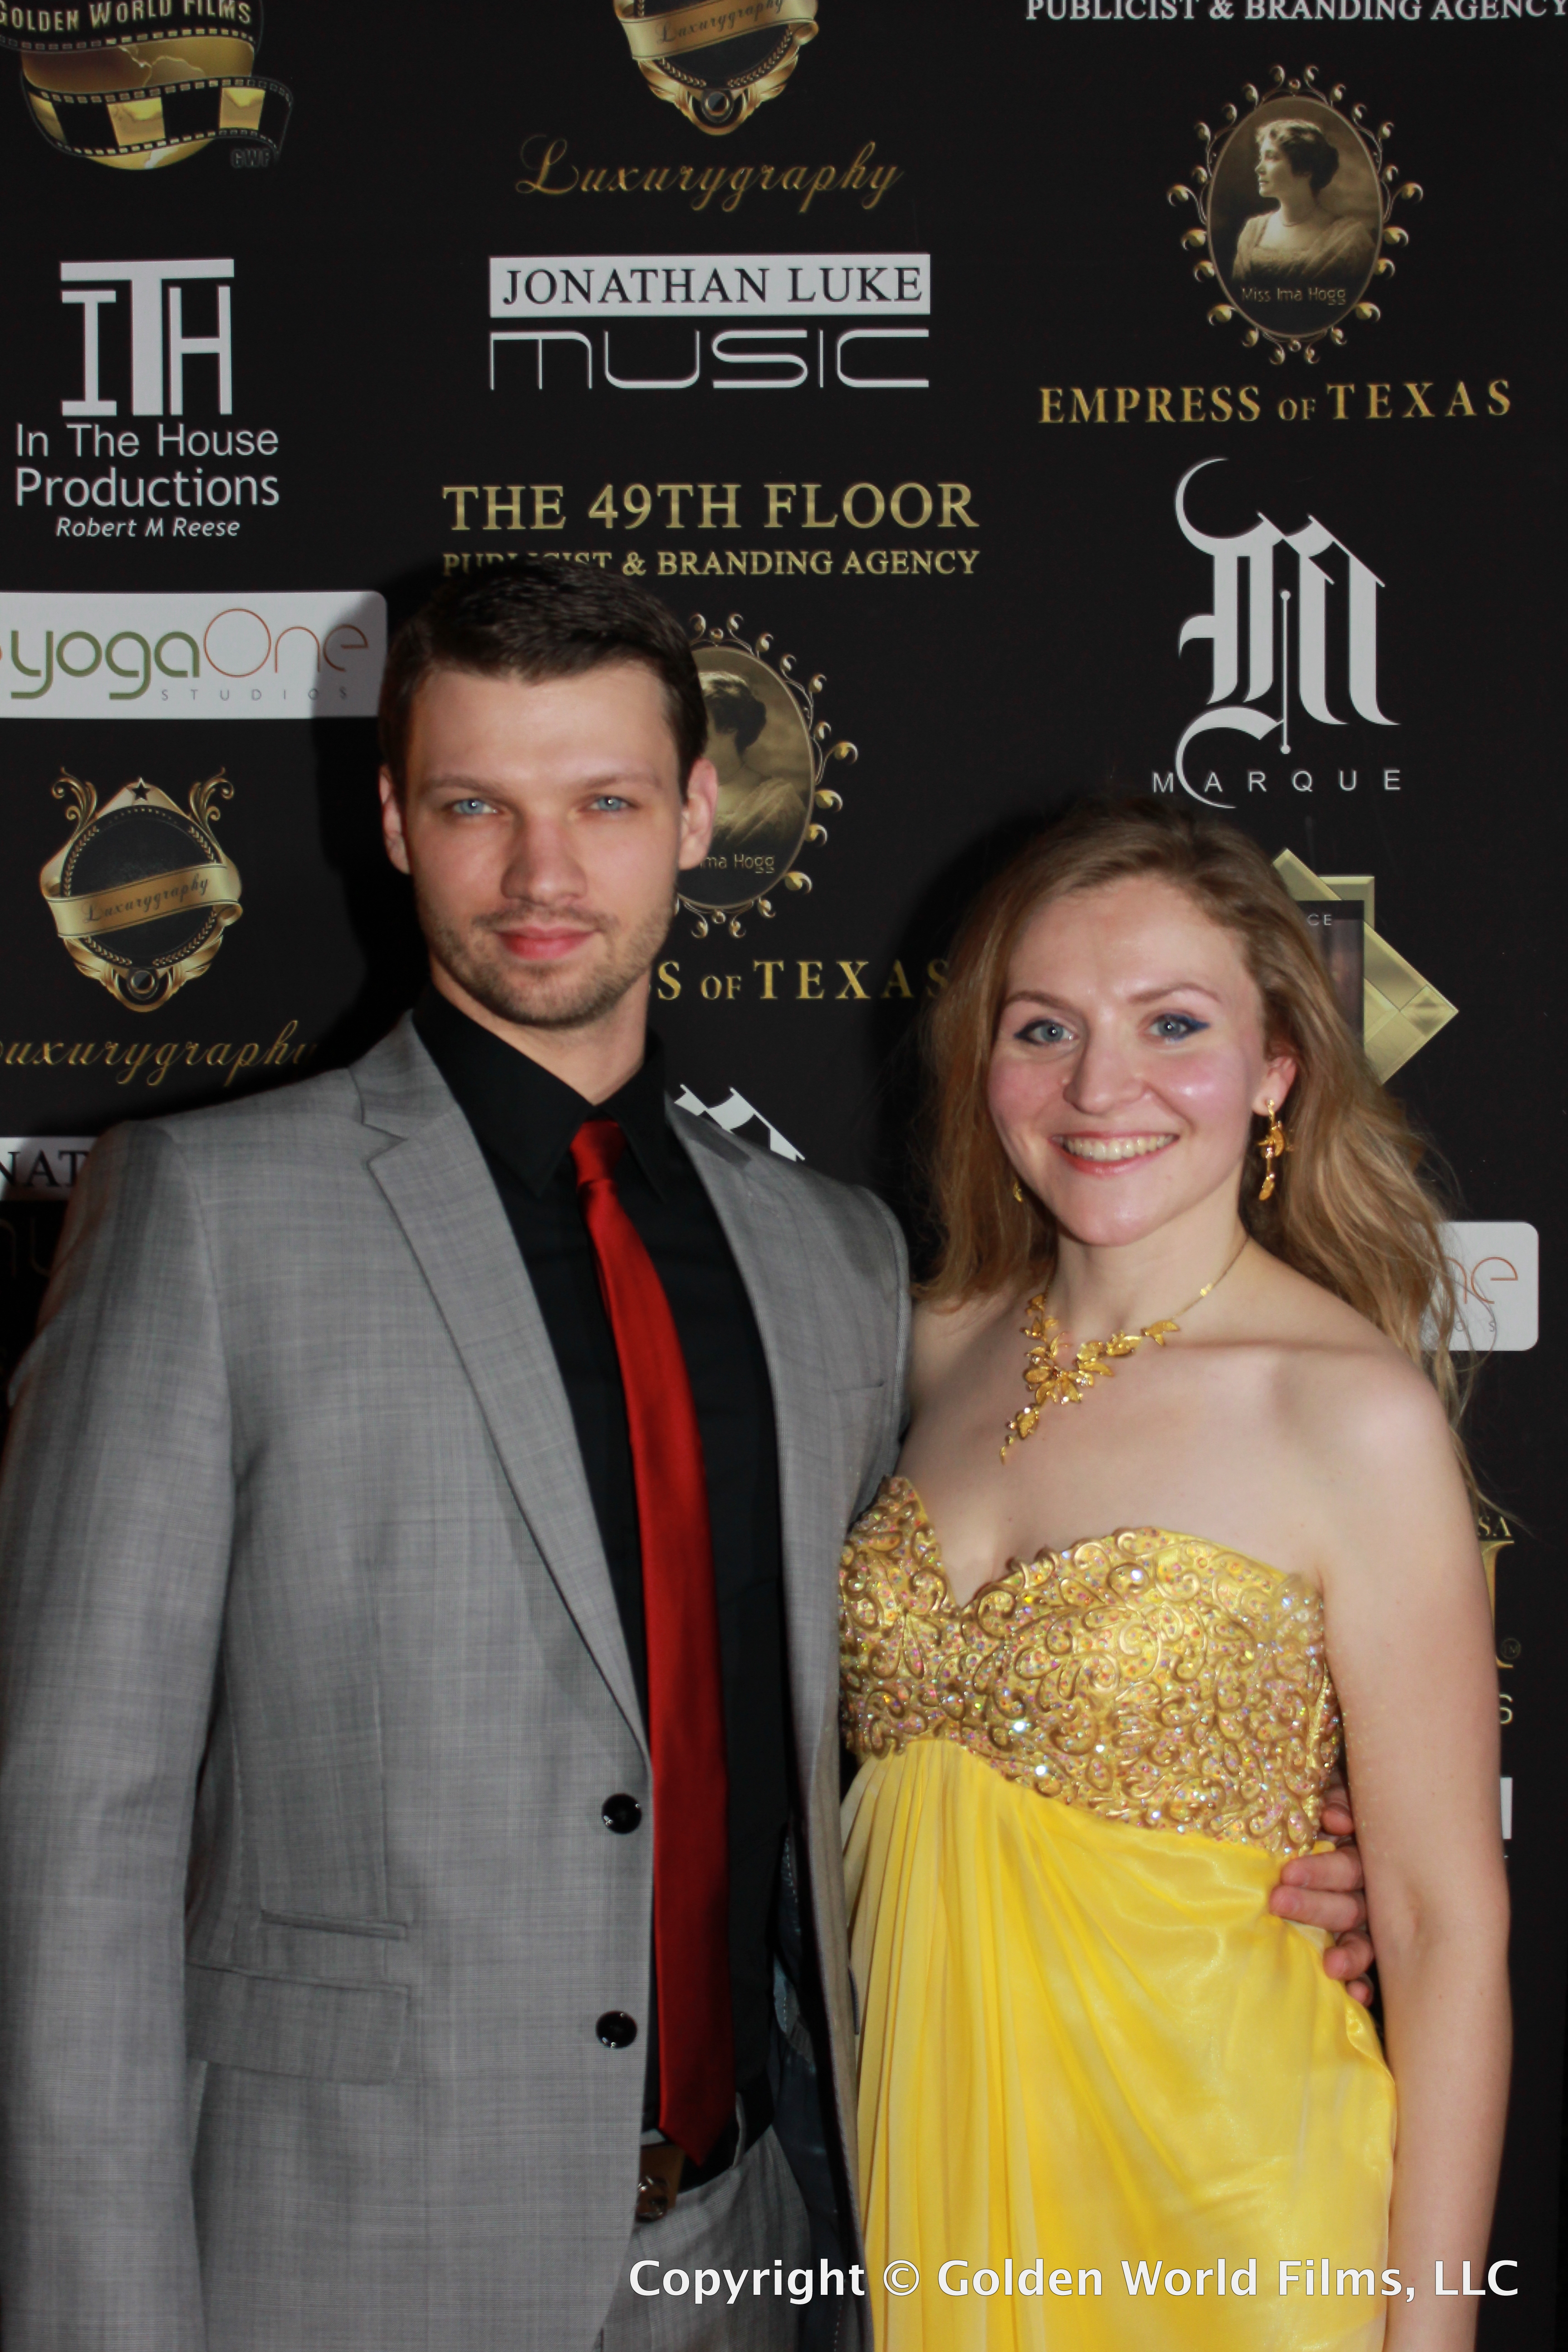 Actor Kevin Dowd and Director Natasha Fissiak at Red Carpet Premier for Dissonance Film